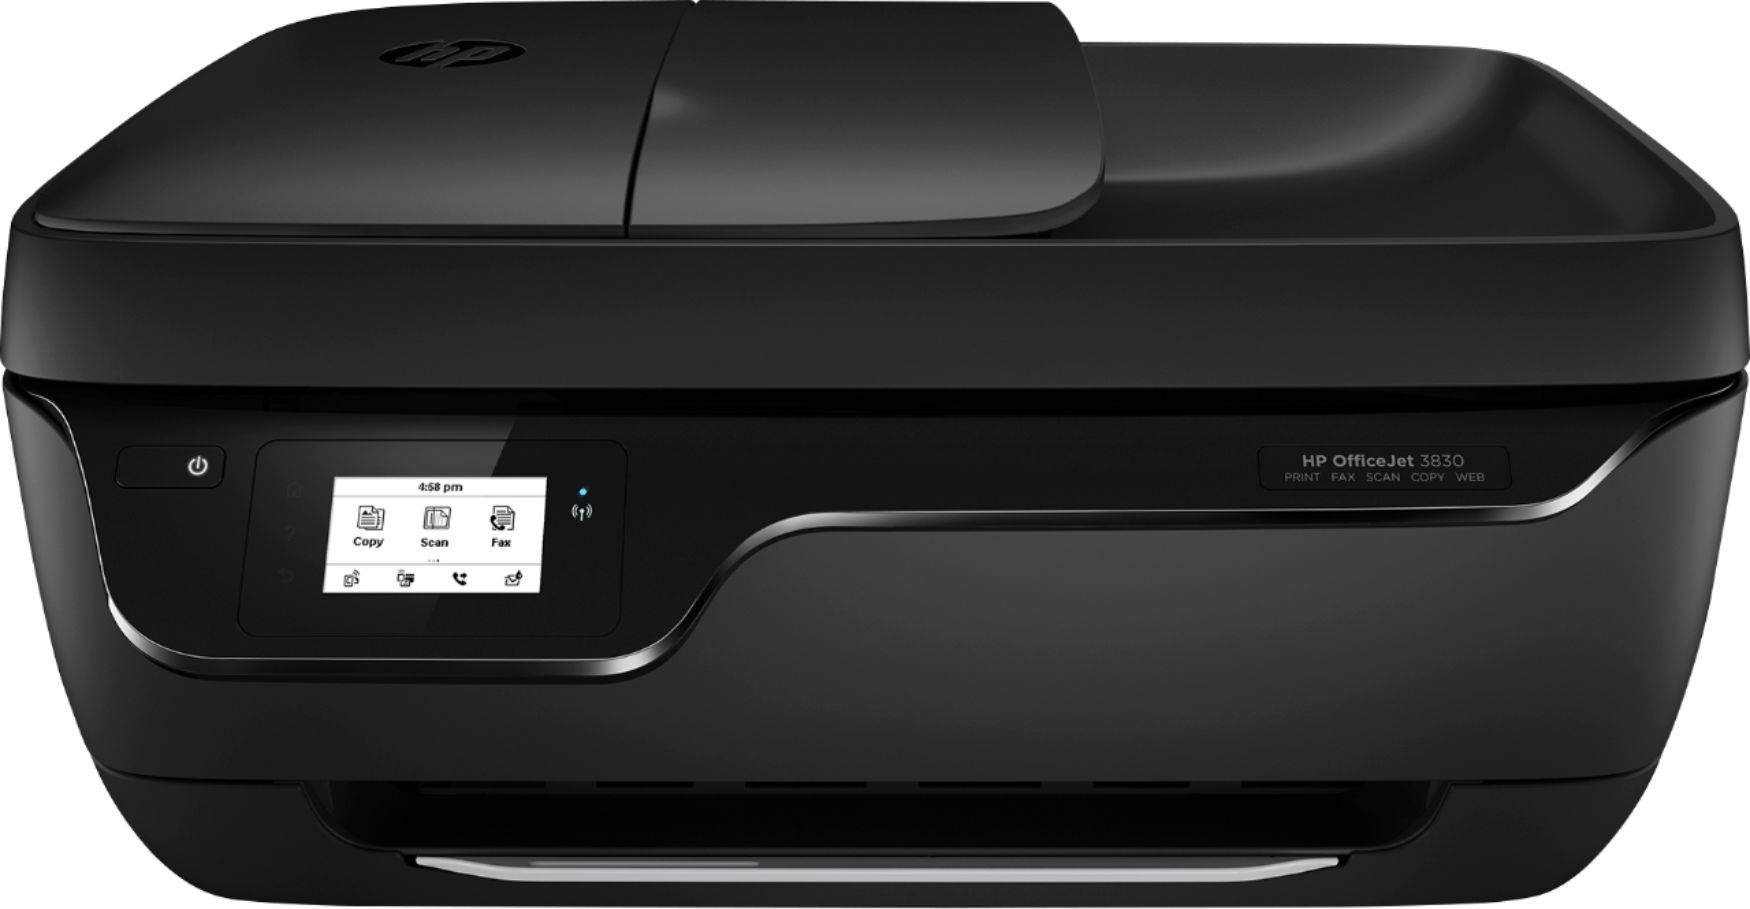 wifi printers that can set up their own network 2017 os x windows